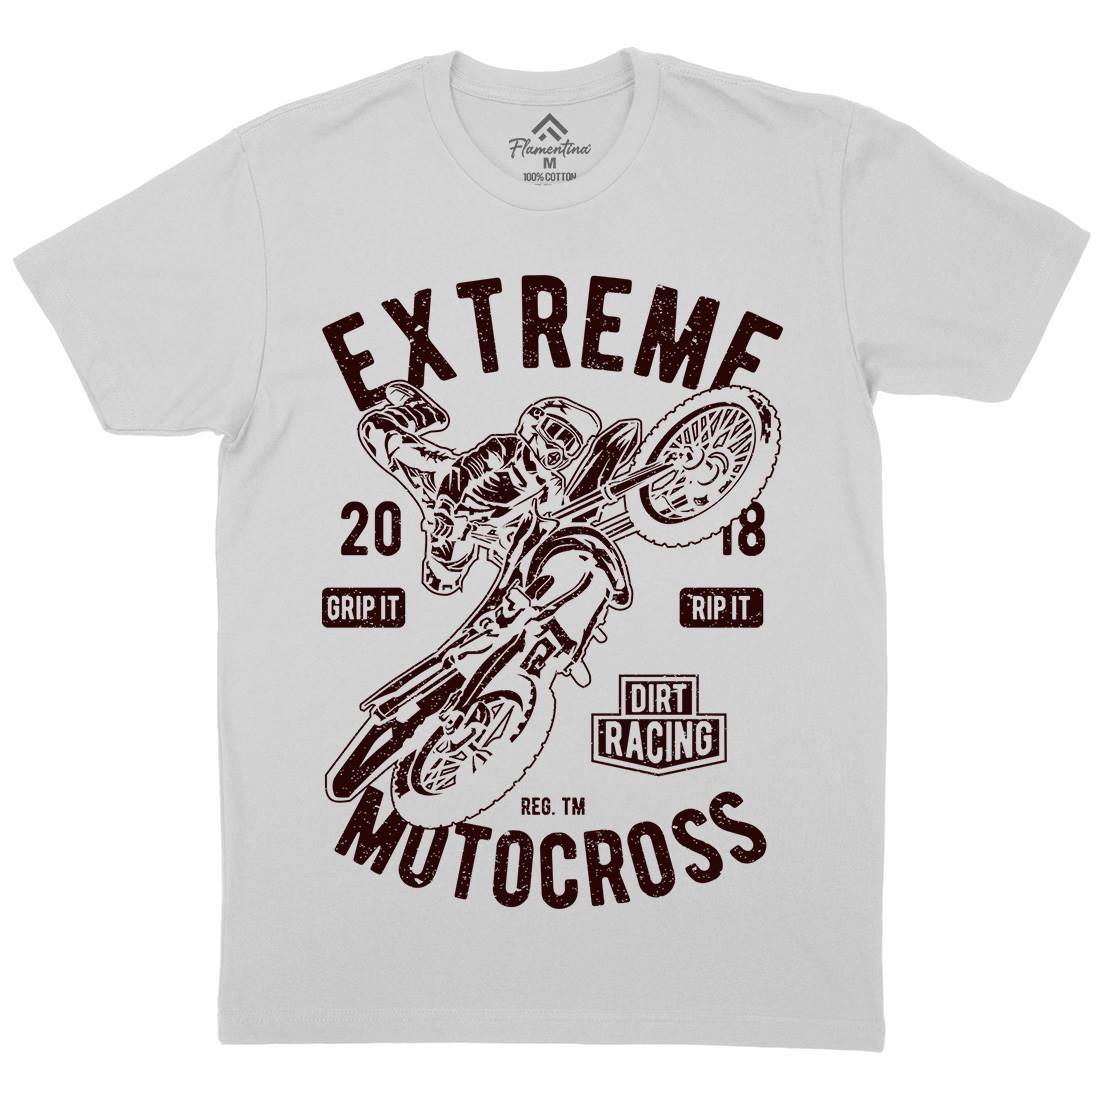 Extreme Motocross Mens Crew Neck T-Shirt Motorcycles A651